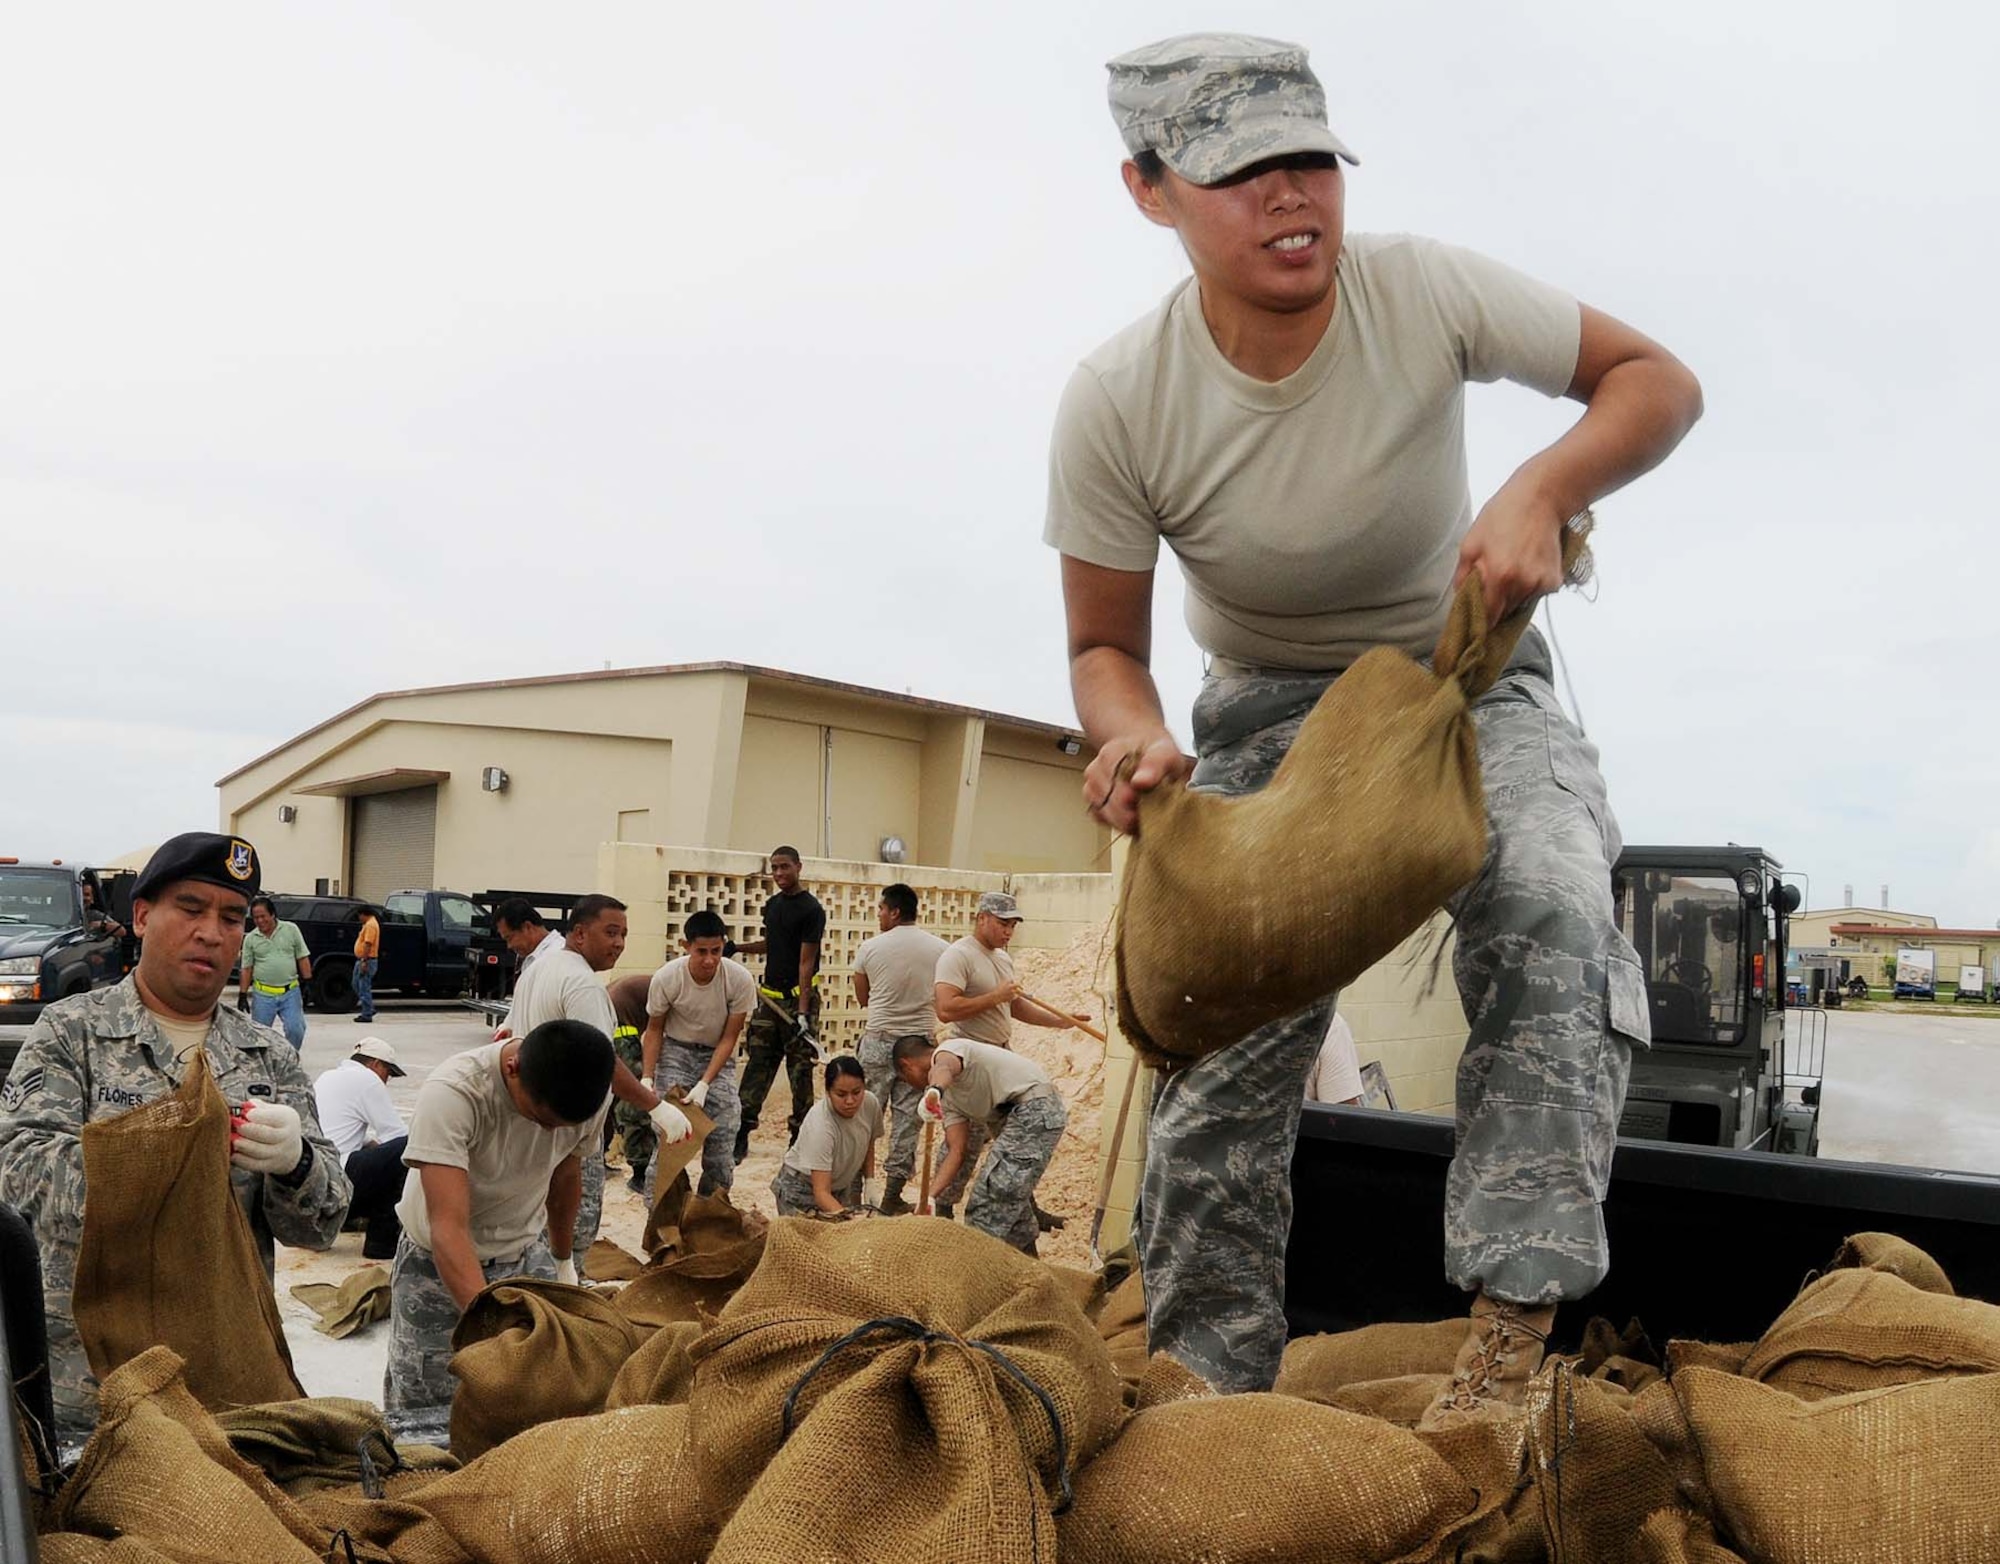 ANDERSEN AIR FORCE BASE, Guam - Airman 1st Class Jolene Muna from the 254th Security Forces Squadron Guam Air National Guard fills and loads sand bags  at Andersen's Self Help Store Sept. 28 in preparation for a tropical storm headed for the island. Due to the untimely weather, Andersen leadership canceled the Team Andersen Air Show 2009 scheduled for Sept. 30, which was to feature the United States Air Force Thunderbirds. (U.S. Air Force photo by Senior Airman Nichelle Anderson)